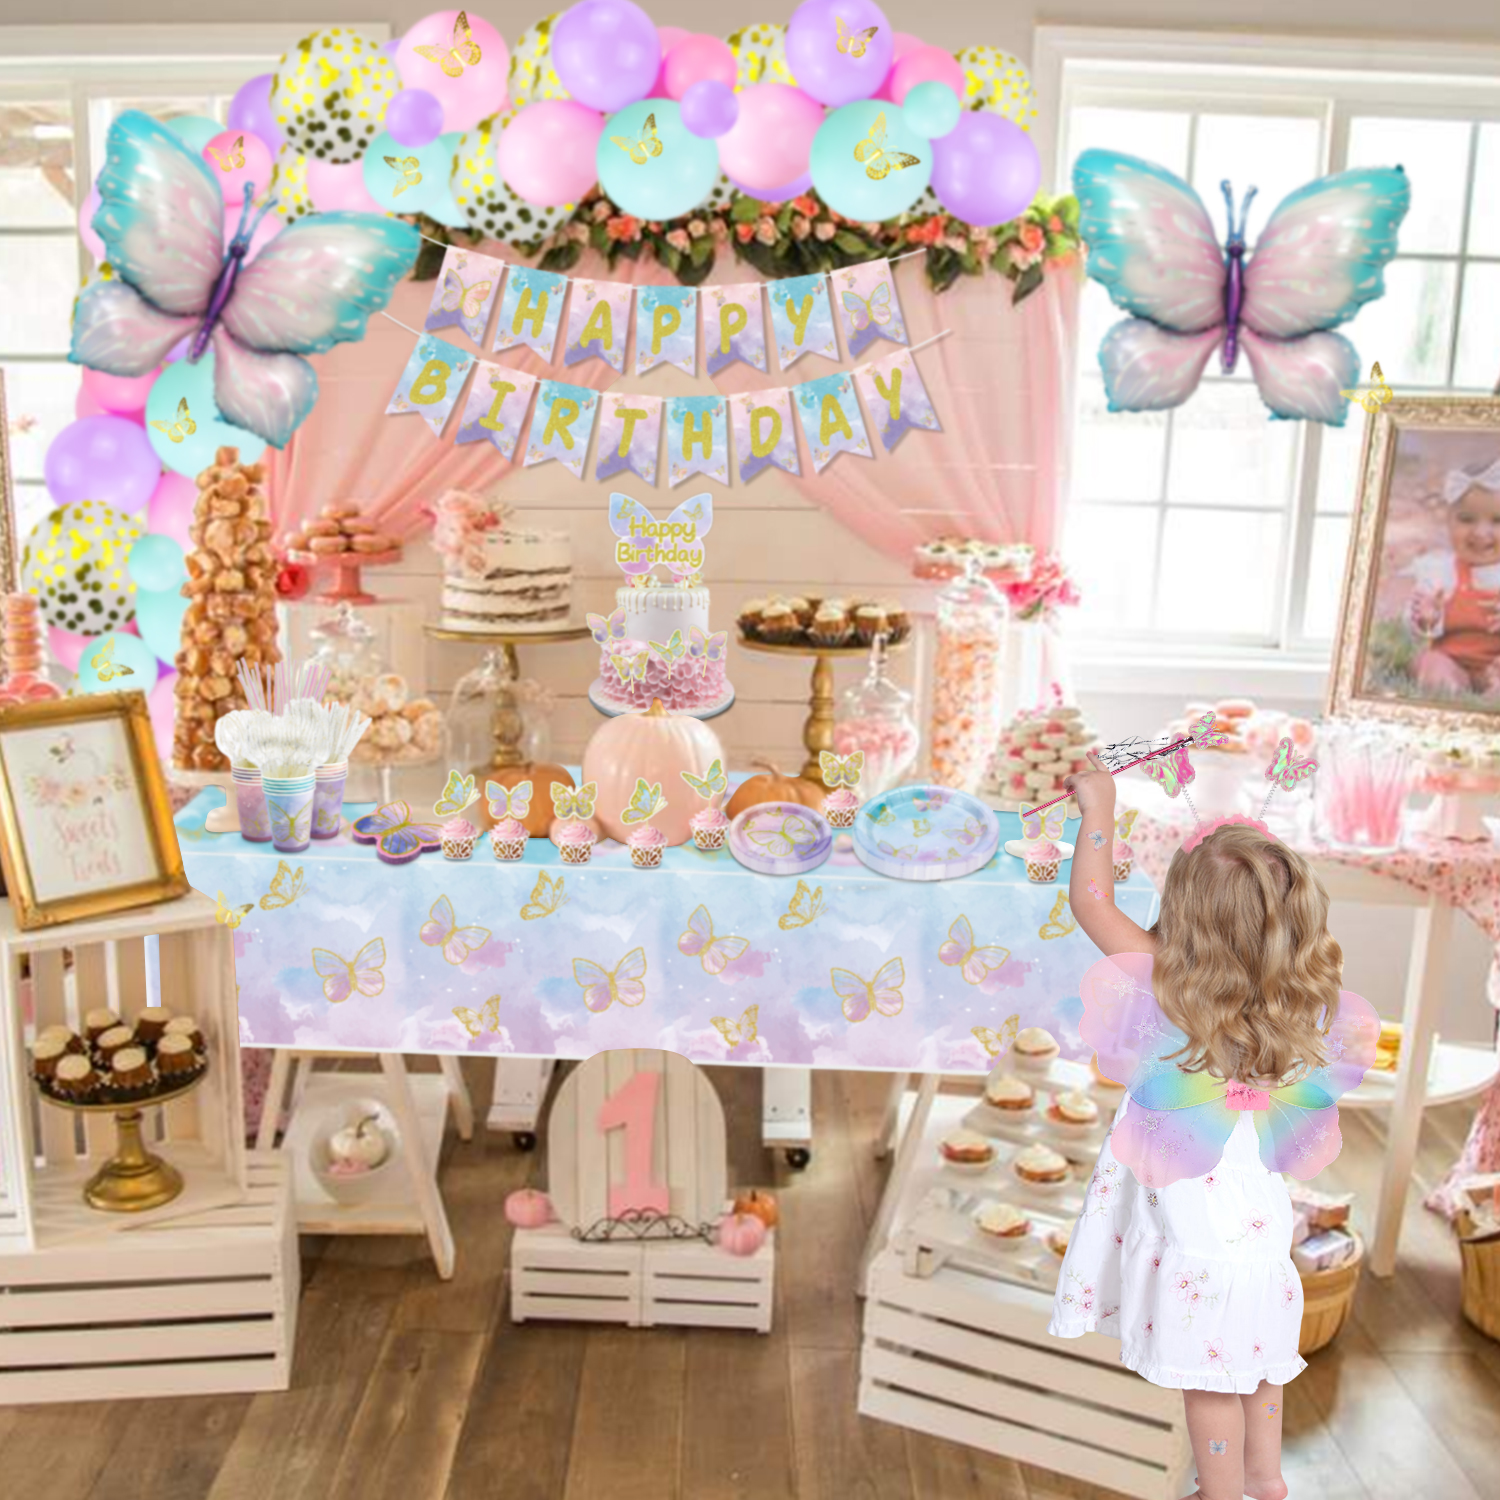 256 Pcs Butterfly Party Decorations - Including Plates, Tablecloth, Balloons, Banner, Butterfly Stickers, Cups, Butterfly Wing Set for Butterfly Birthday Decorations, Fairy Party Supplies - image 5 of 7